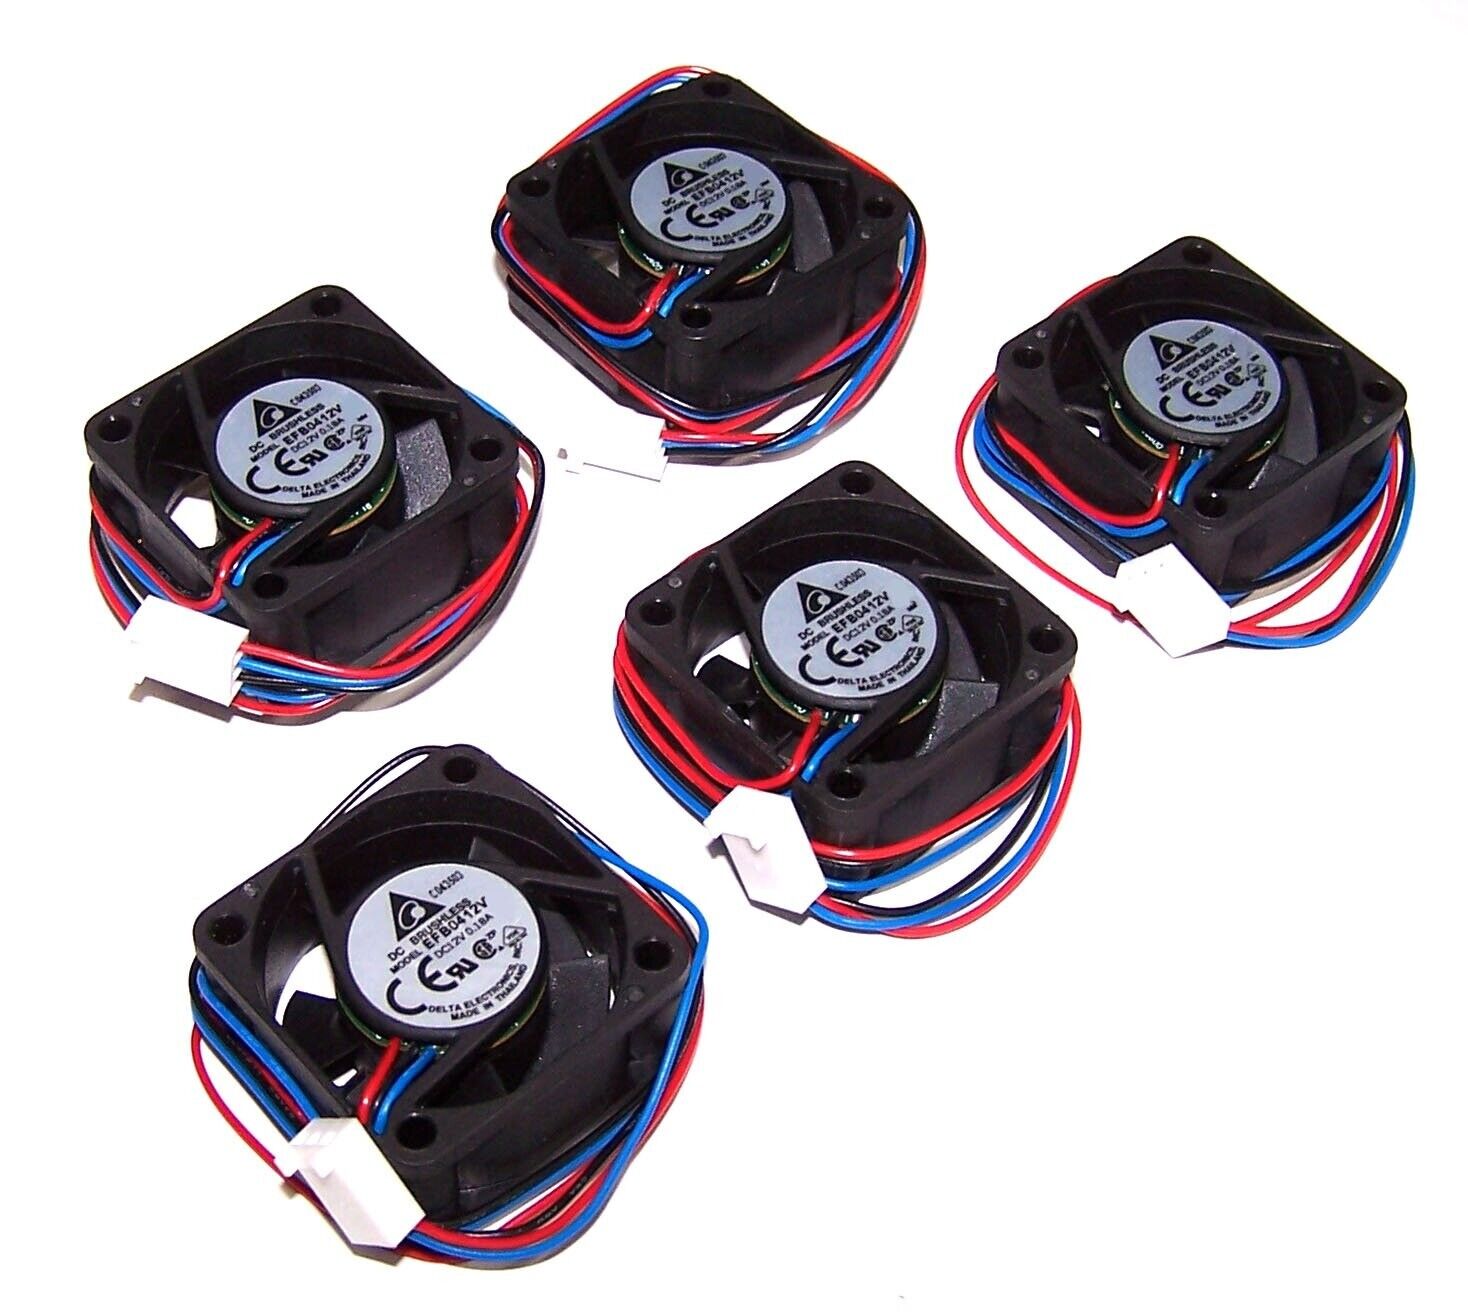 Lot of 5 Fans for Dell PowerConnect 3424P (UJ599) Quiet Networking